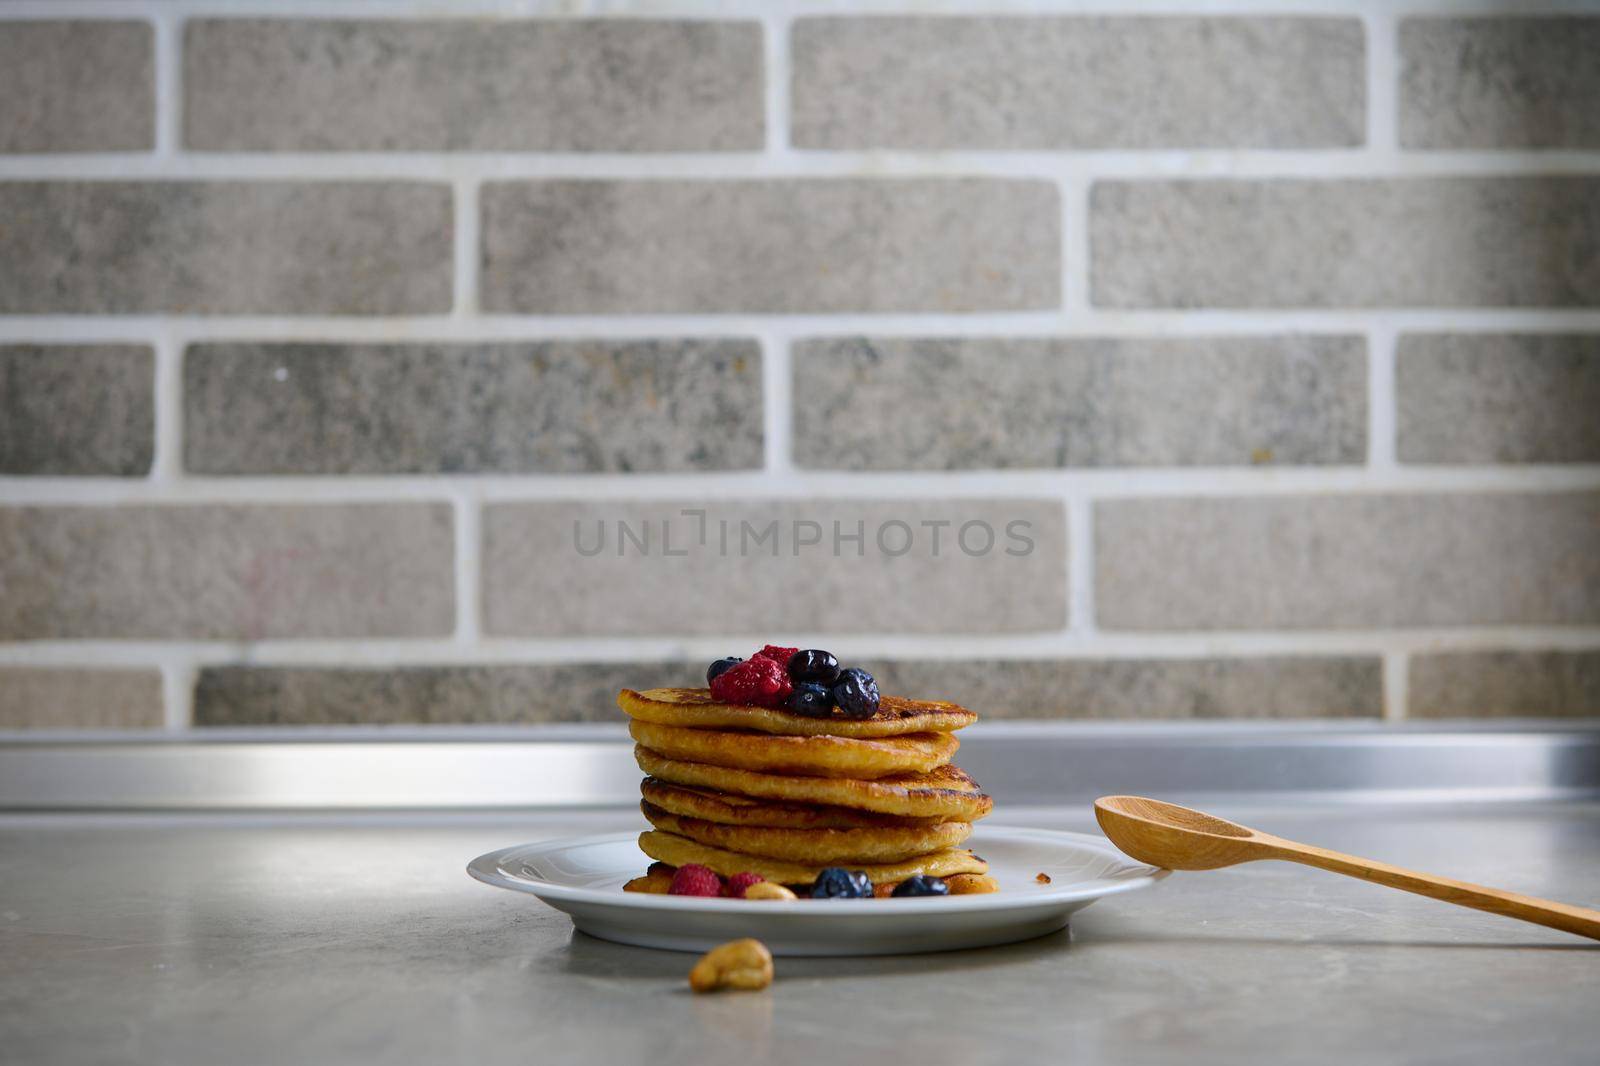 Stack of homemade delicious pancakes garnished with raspberries, blueberries and cashews on a white plate against a gray brick kitchen wall. Shrove Tuesday, Shrovetide concept. Food background